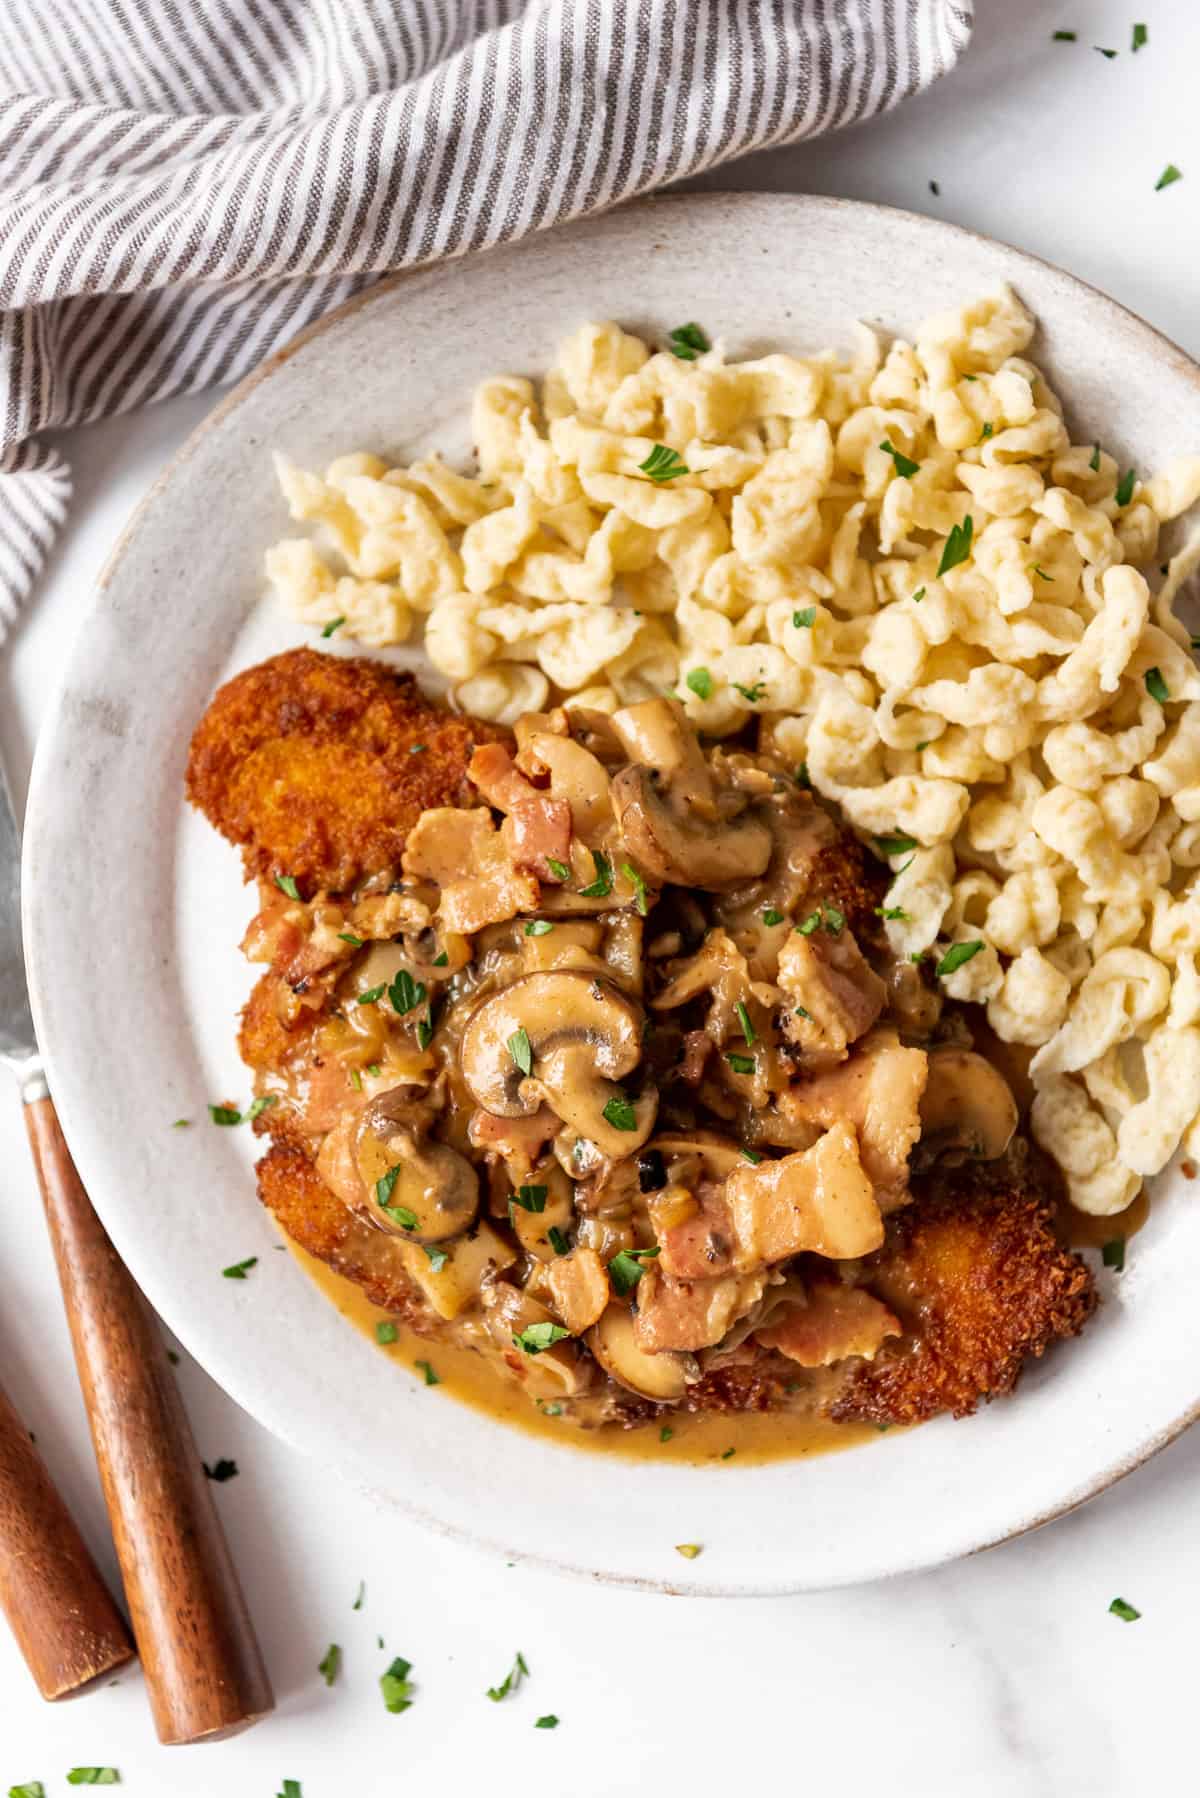 Jagerschnitzel with gravy and spaetzel served with parsley